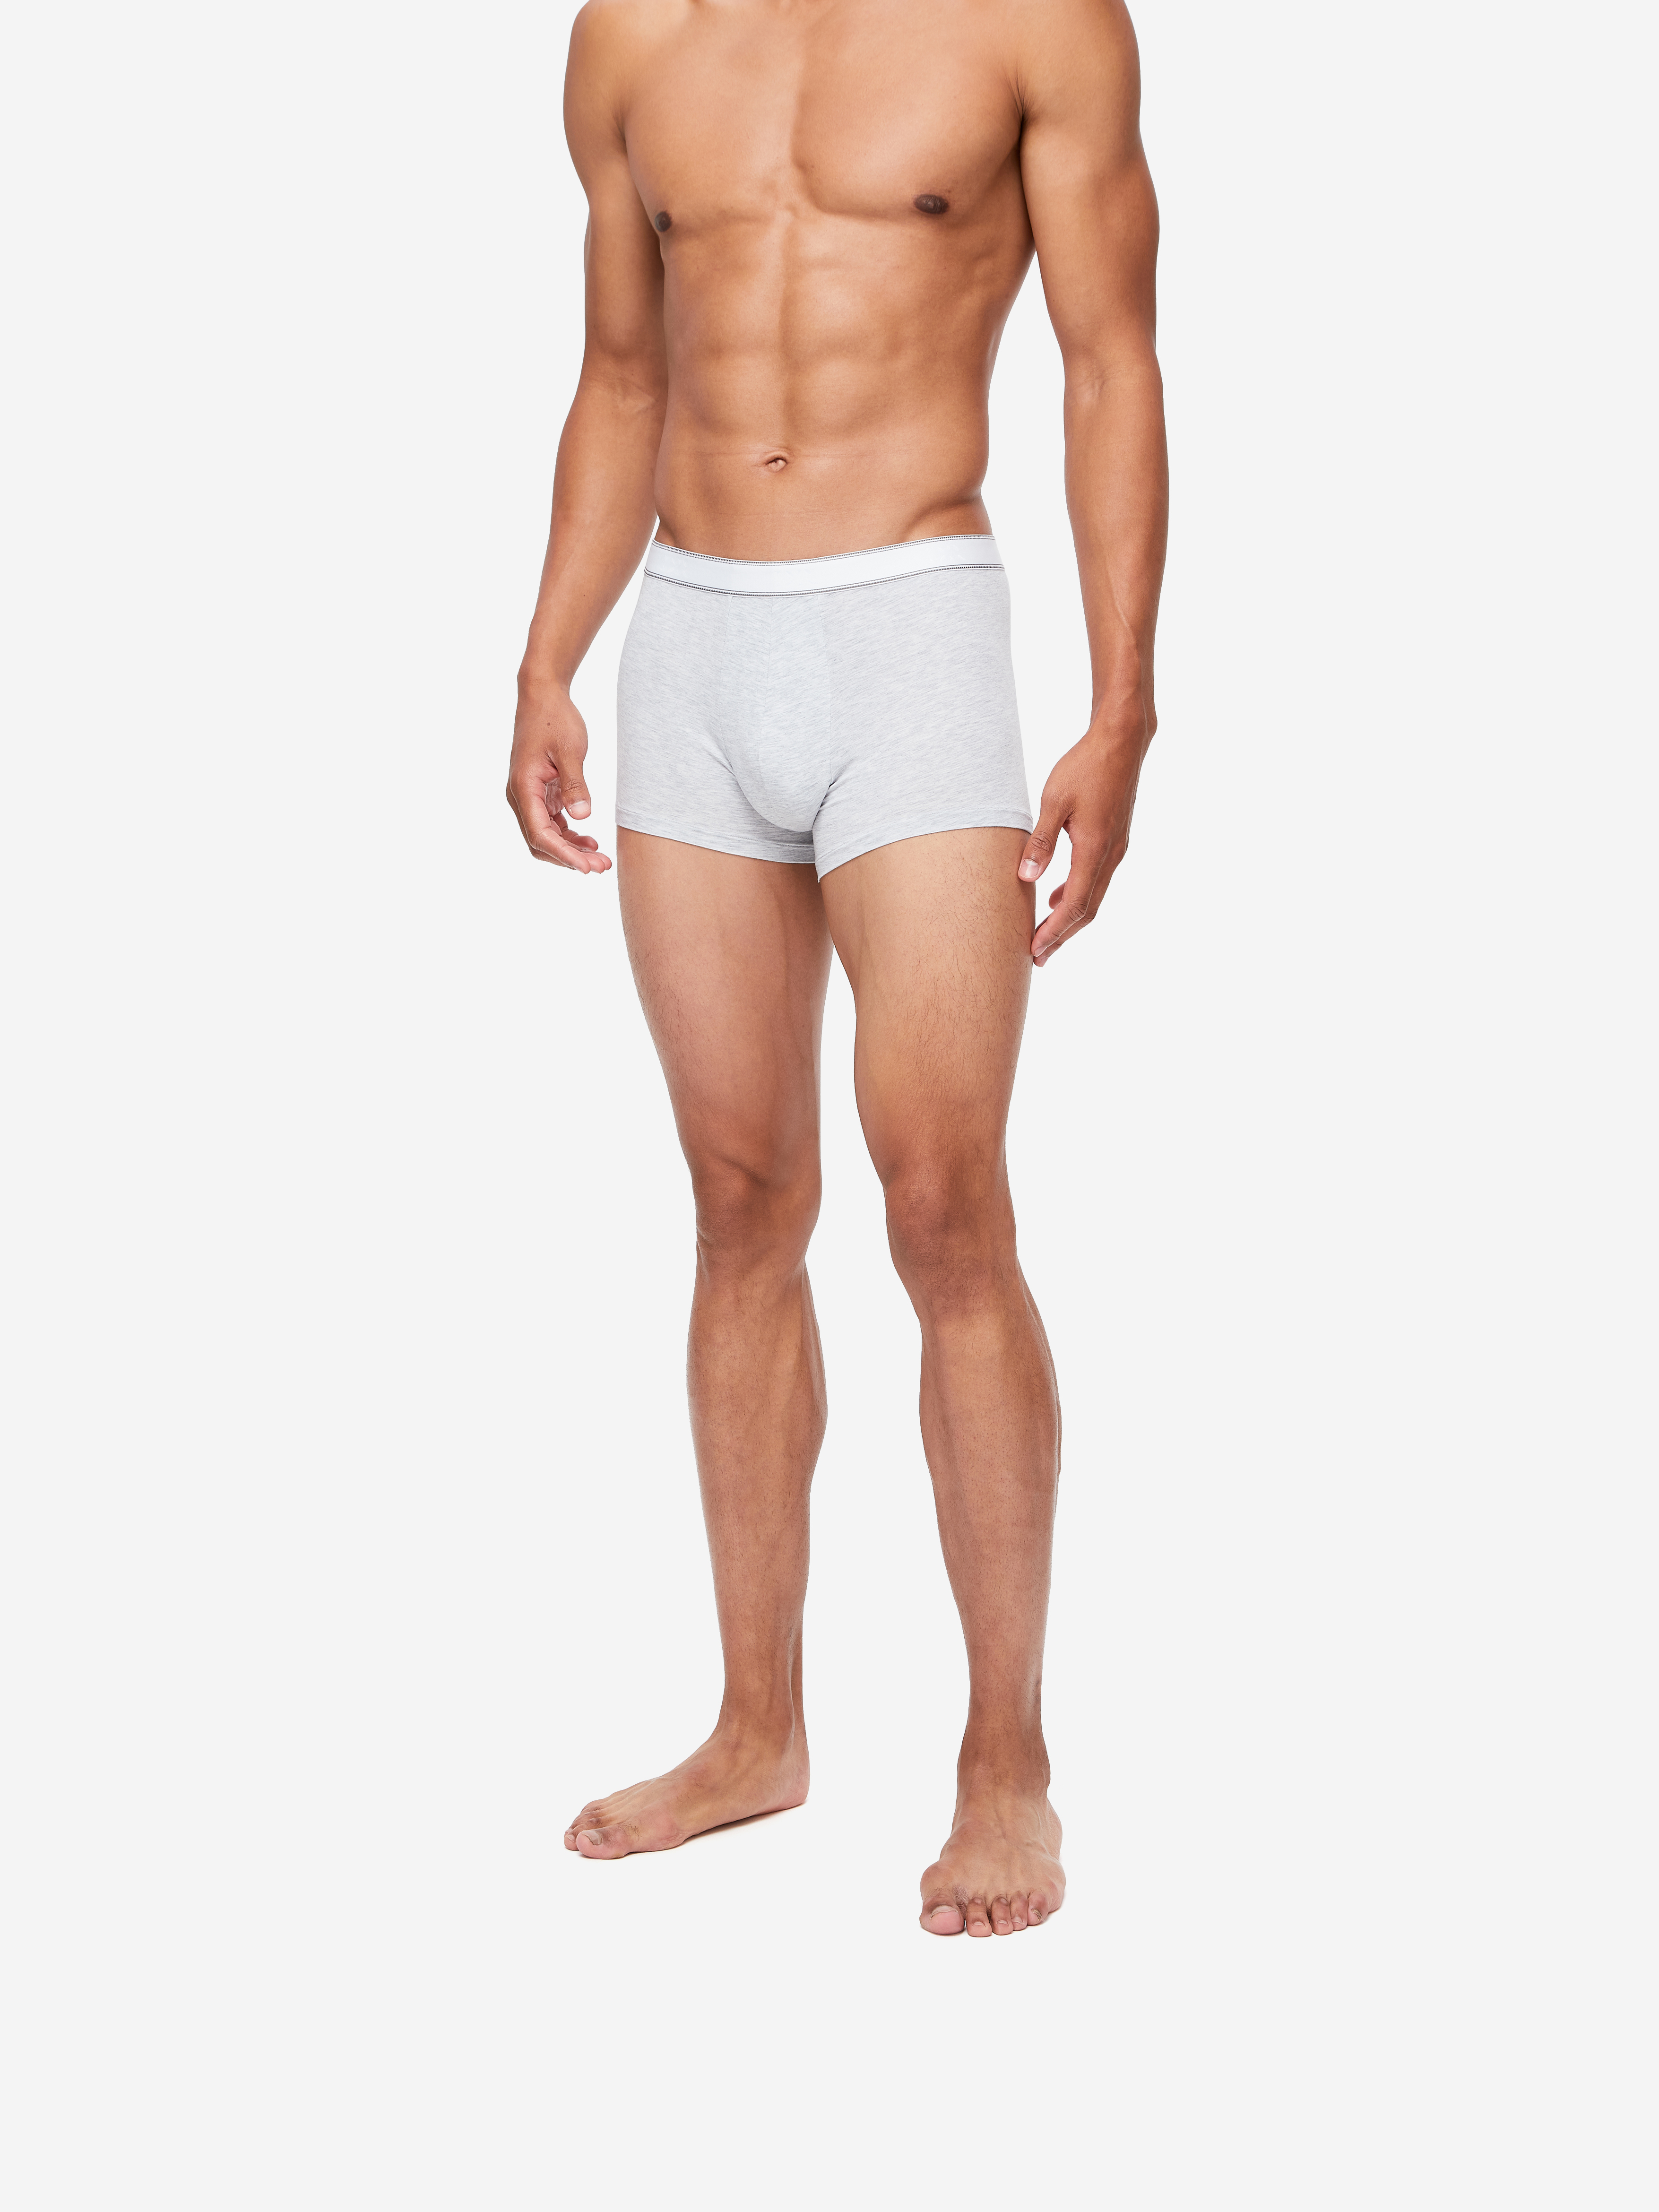 https://www.datocms-assets.com/21485/1614632668-mens-boxer-briefs-ethan-micro-modal-stretch-silver-front-close-up.jpg